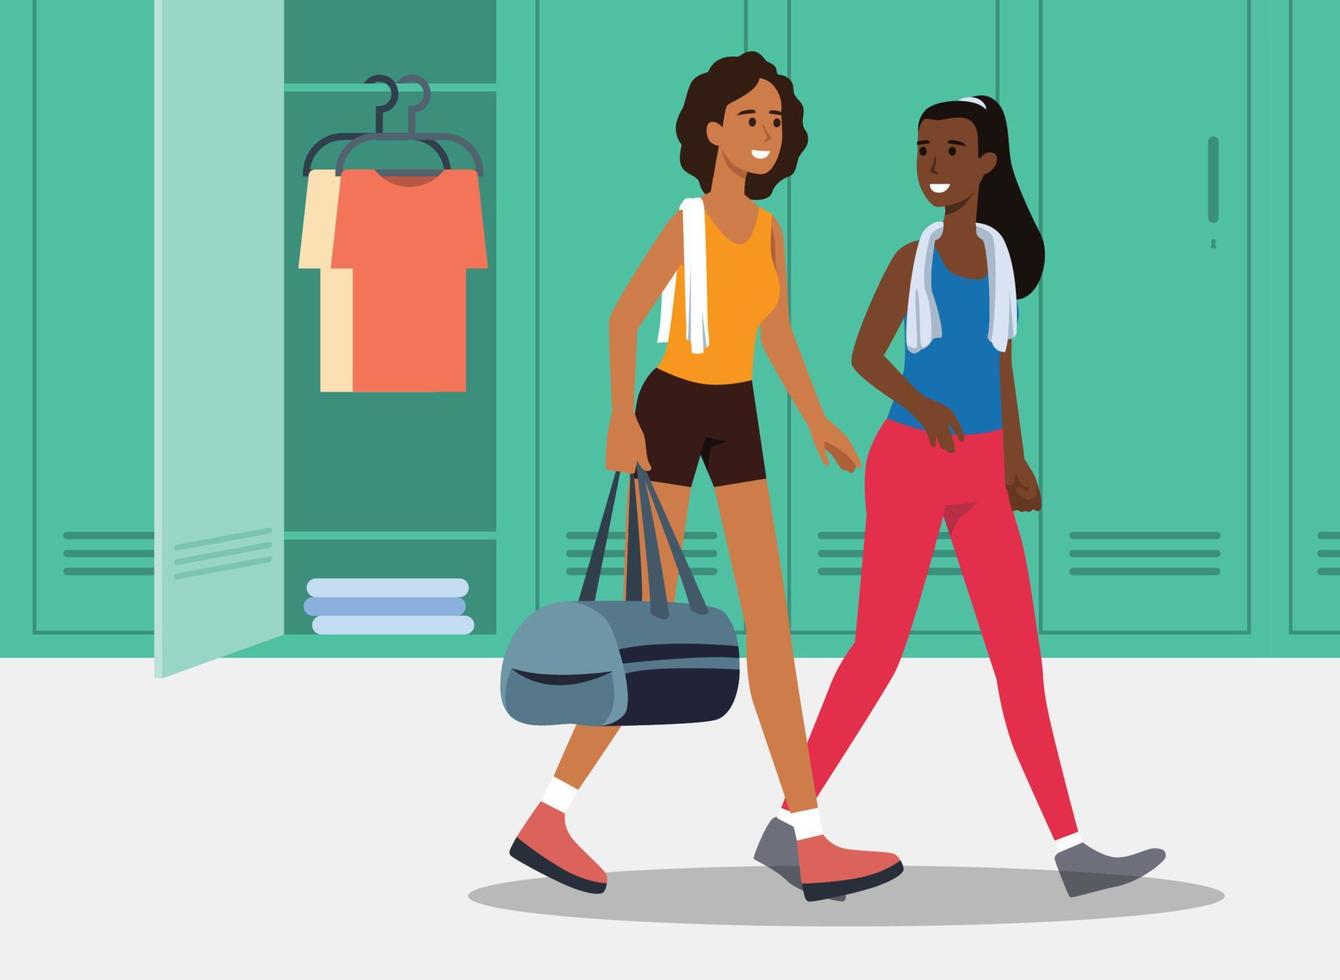 Women going to the gym while talking in the locker room holding a gym bag flat vector illustration